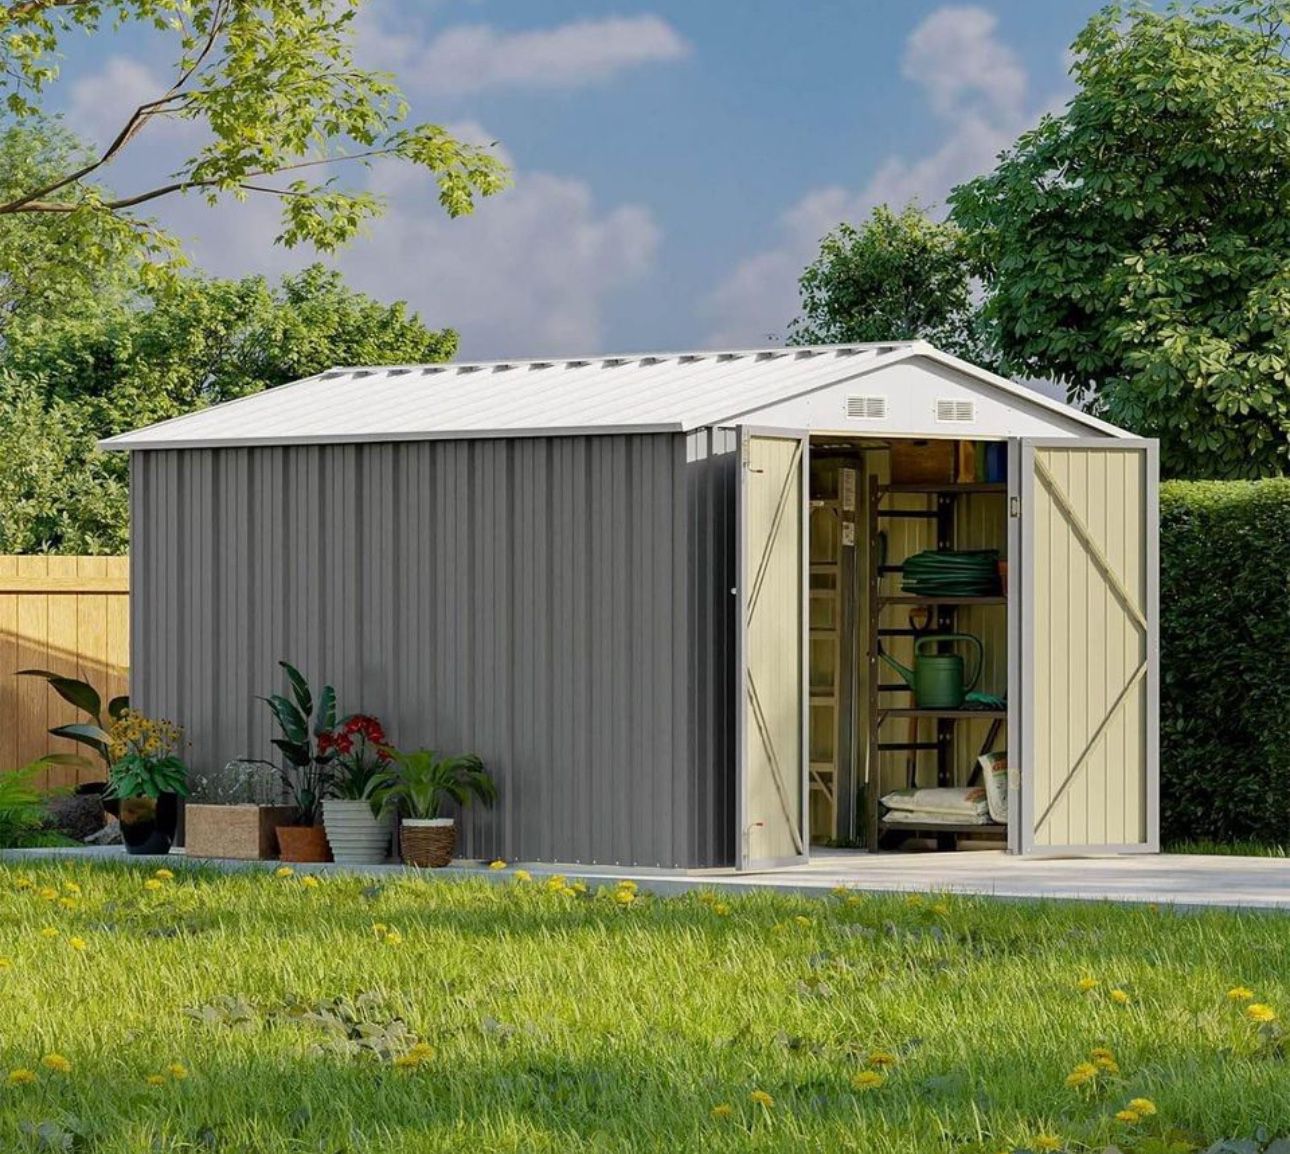 Patiowell 8x10 FT Outdoor Storage Shed, Large Garden Tool Metal Shed with Sloping Roof and Double Lockable Door, Outdoor Shed for Backyard Garden Pati